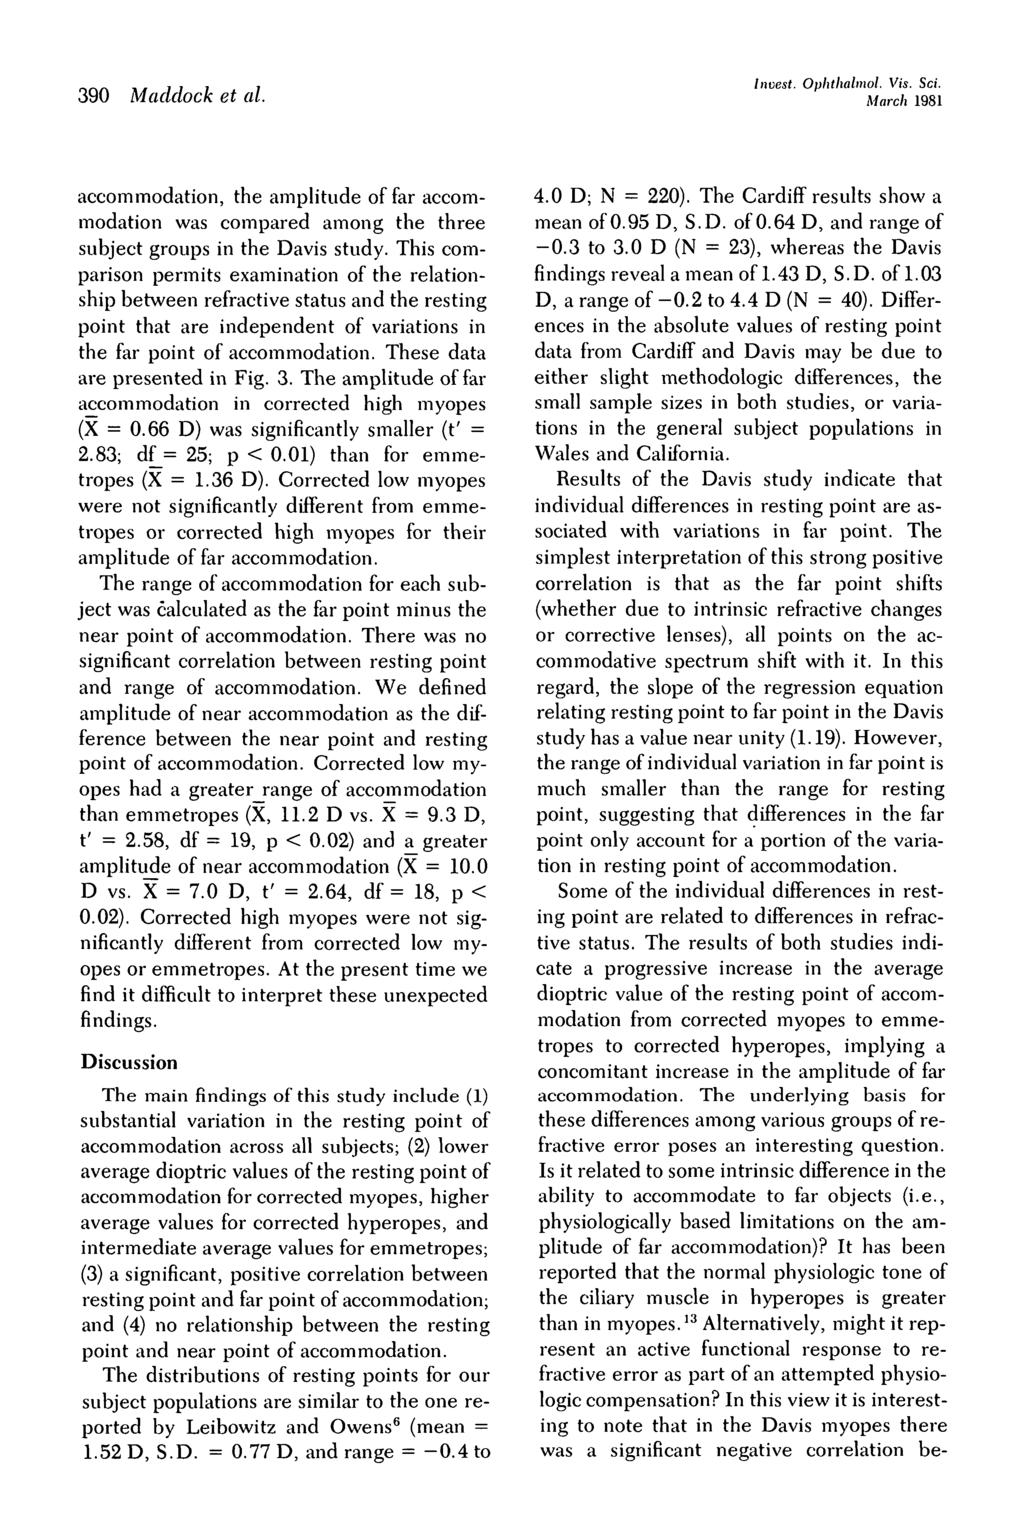 39 Maddock et al. Invest. Ophtlialmol. Vis. Sci. March 1981 accommodation, the amplitude of far accommodation was compared among the three subject groups in the Davis study.